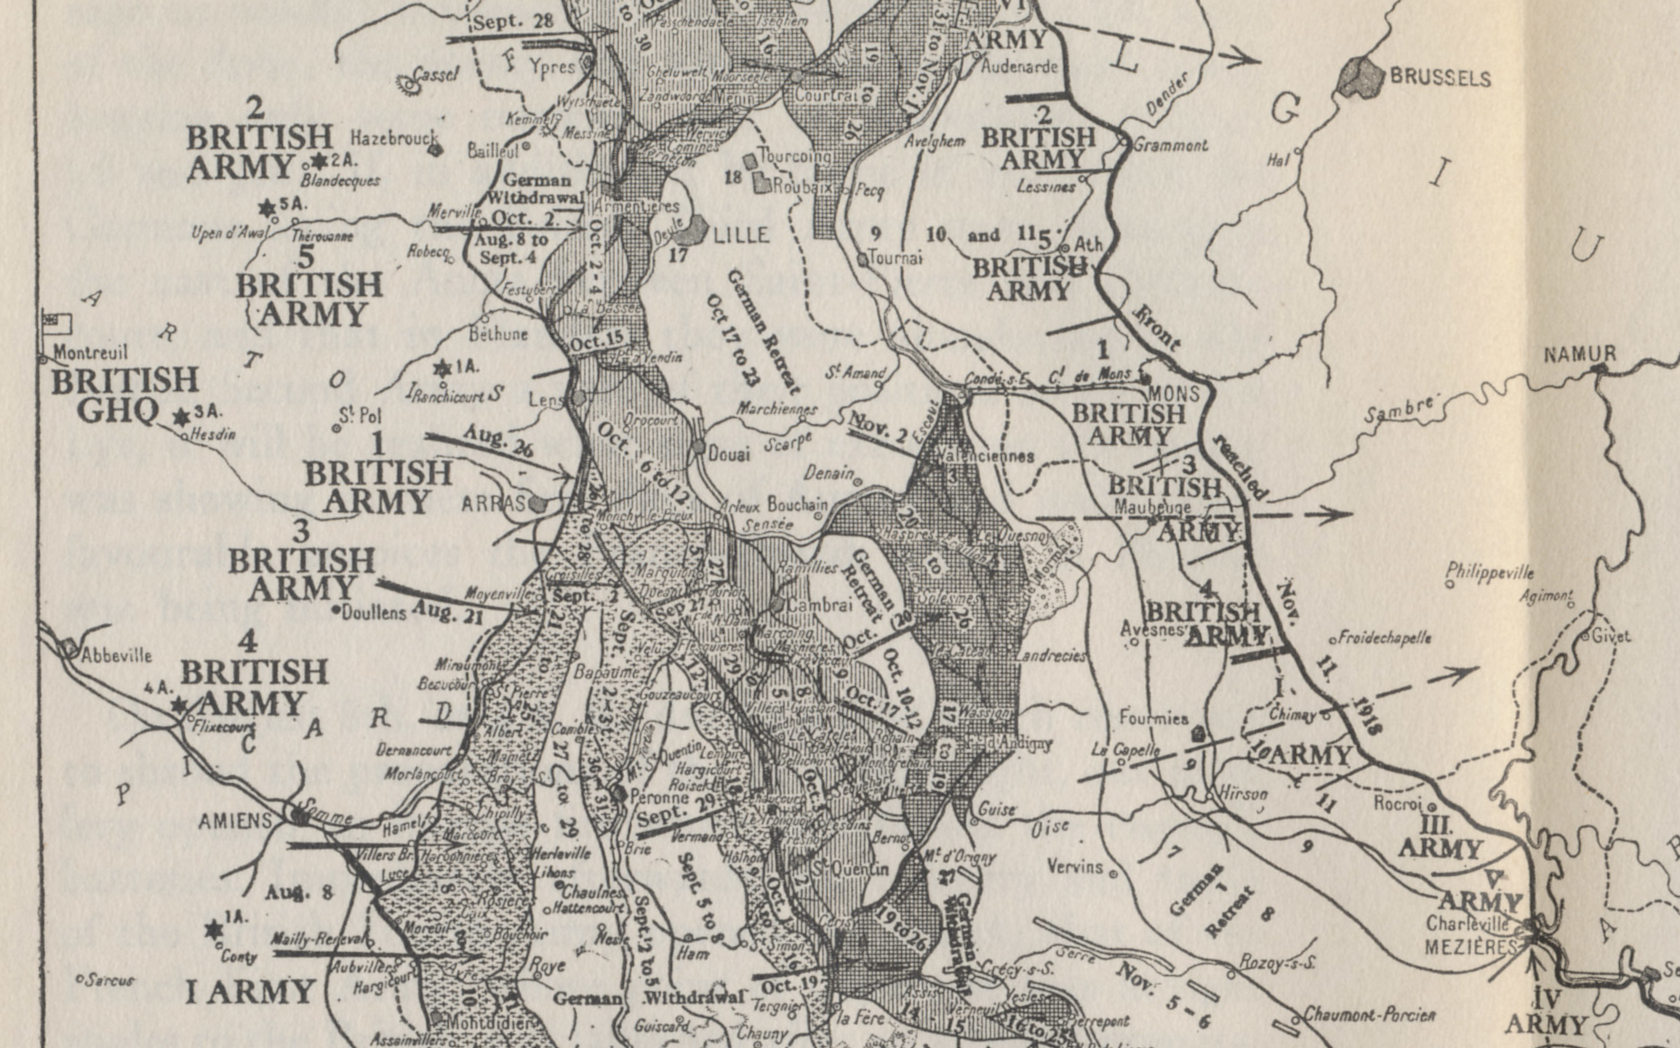 Detail showing the British sector of the Western Front from a map of the Allied offensives of 1918, from July 18 and the Second Battle of the Marne to the Armistice on November 11. From The Memoirs of Marshall Foch by Marshall Foch. The 1st and other armies to the south are French.